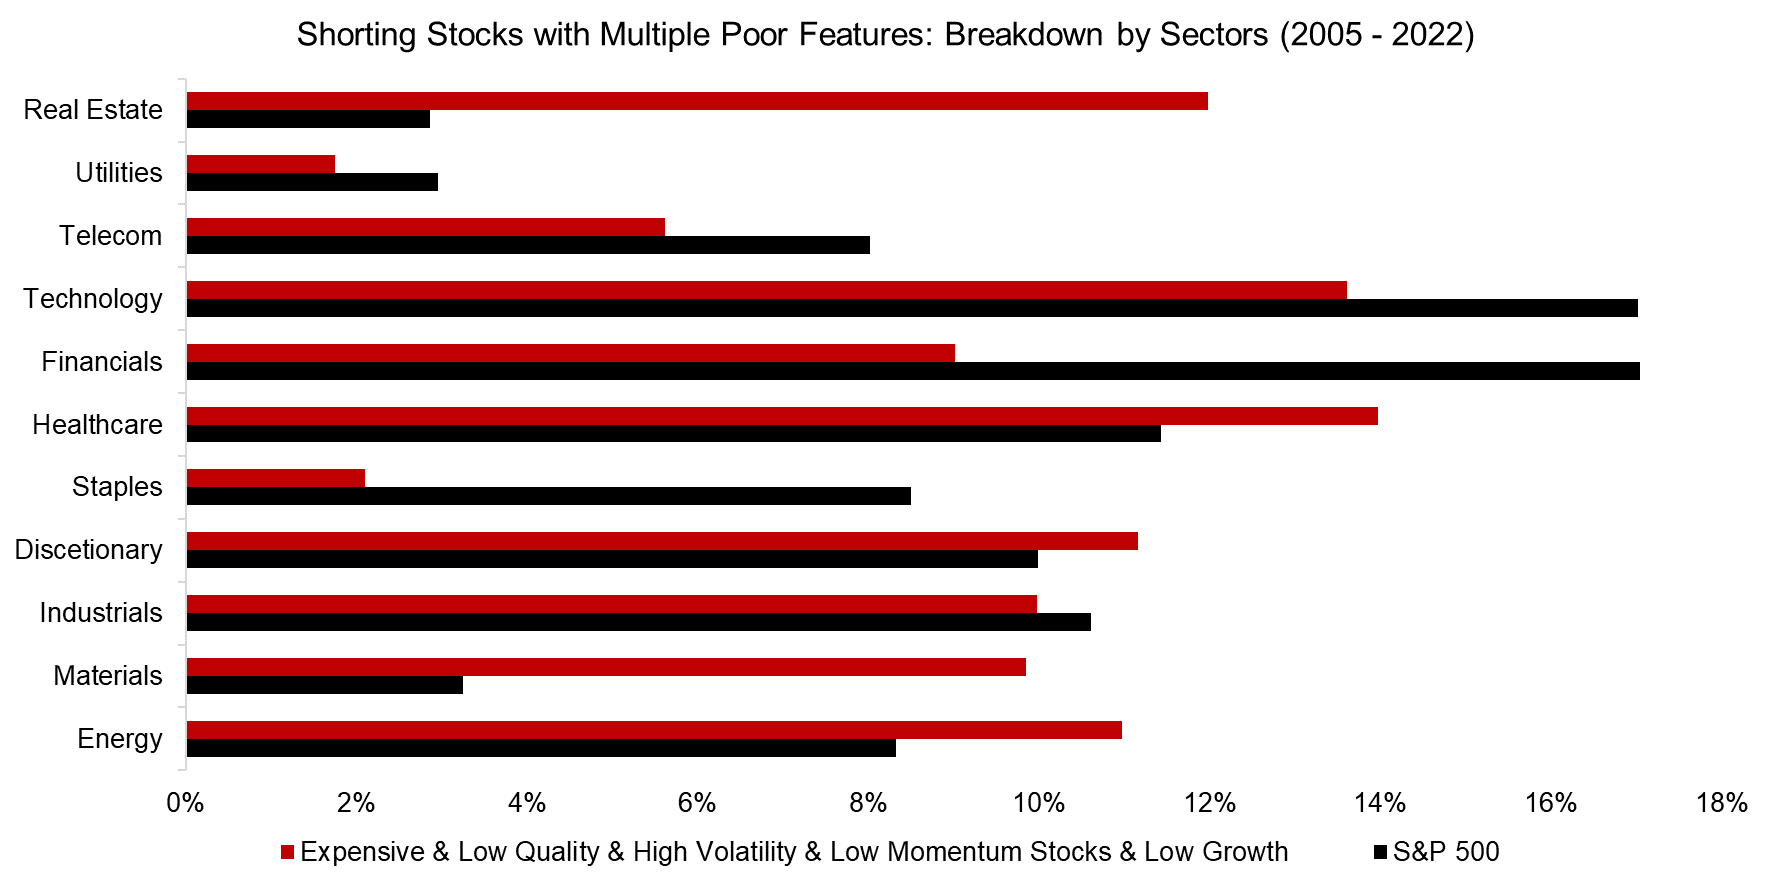 https://wps.factorresearch.com/wp-content/uploads/2023/01/Shorting-Stocks-with-Multiple-Poor-Features-Breakdown-by-Sectors-2005-2022.png